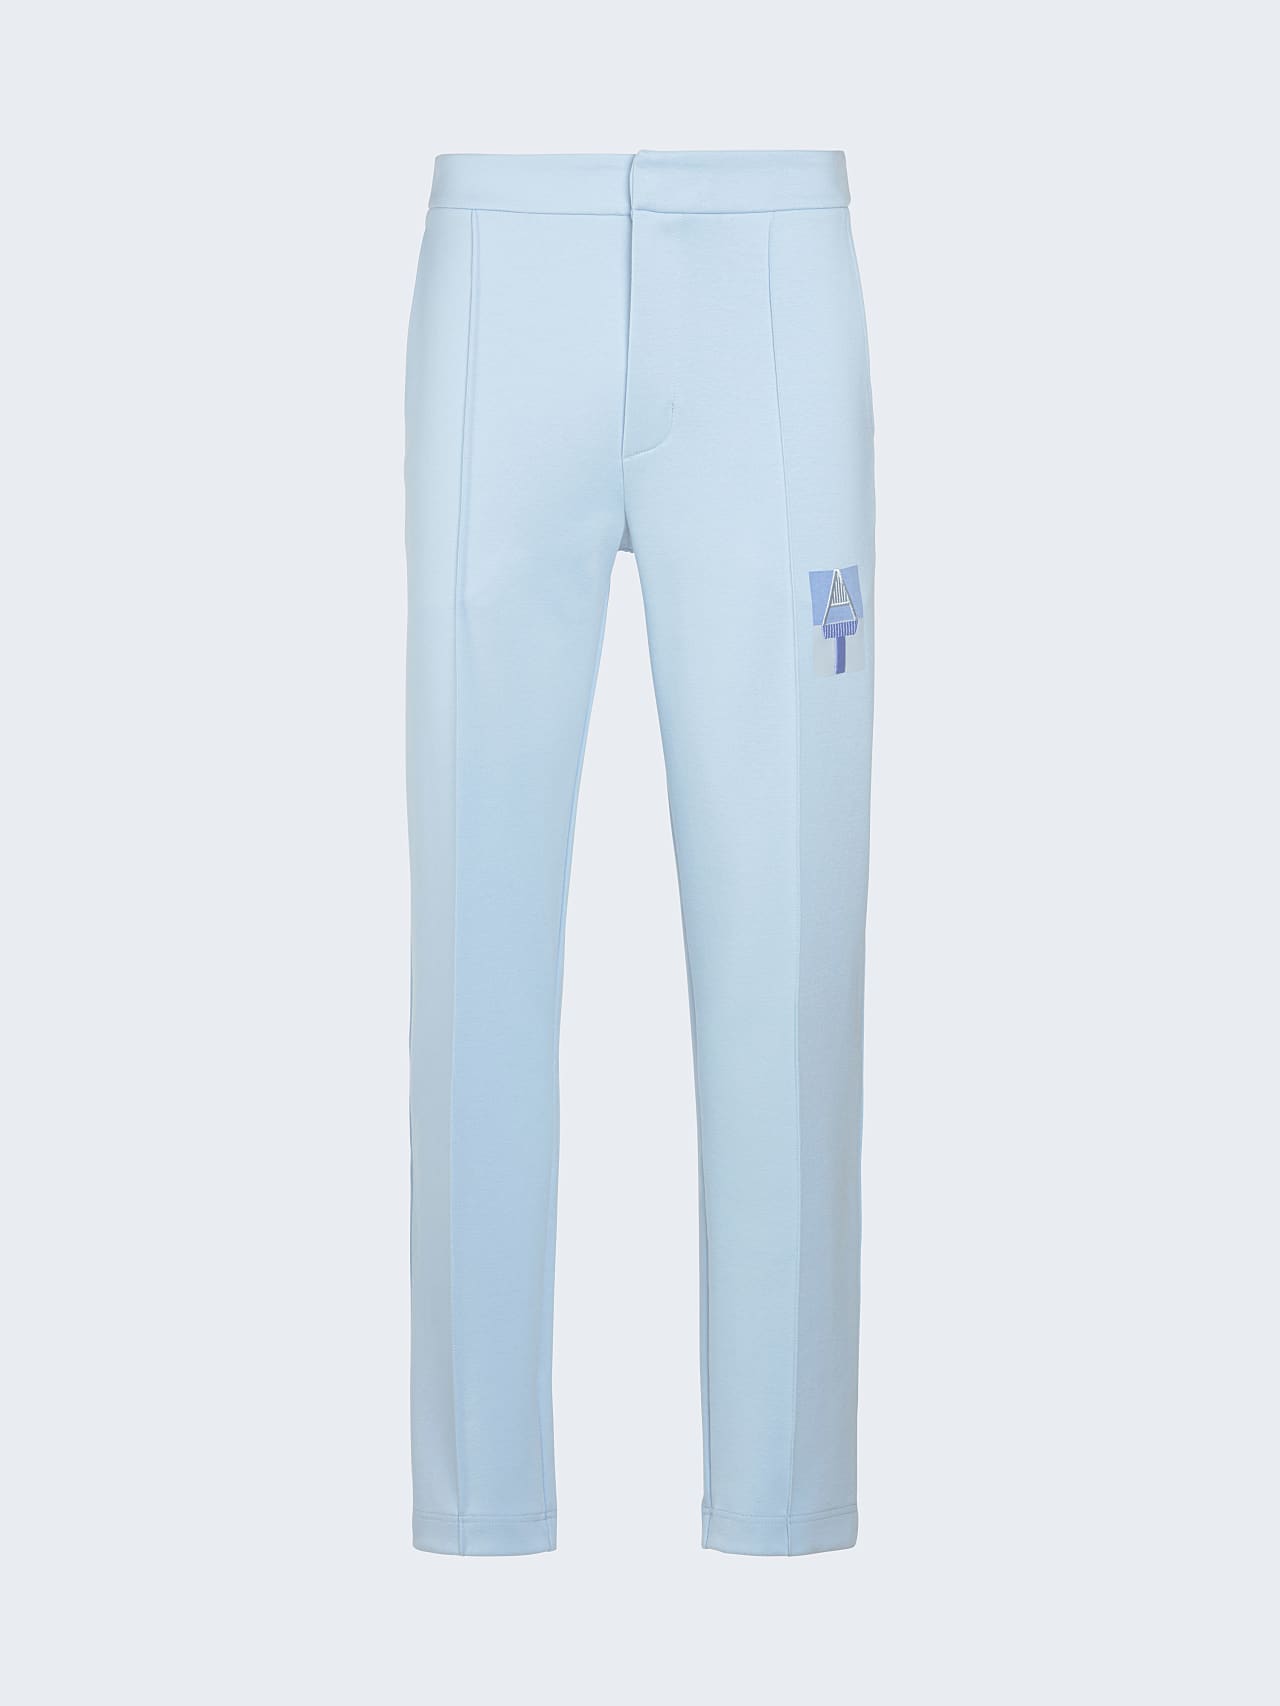 AlphaTauri | PRYK V8.Y6.01 | Sweatpants with Logo Embroidery in light blue for Men